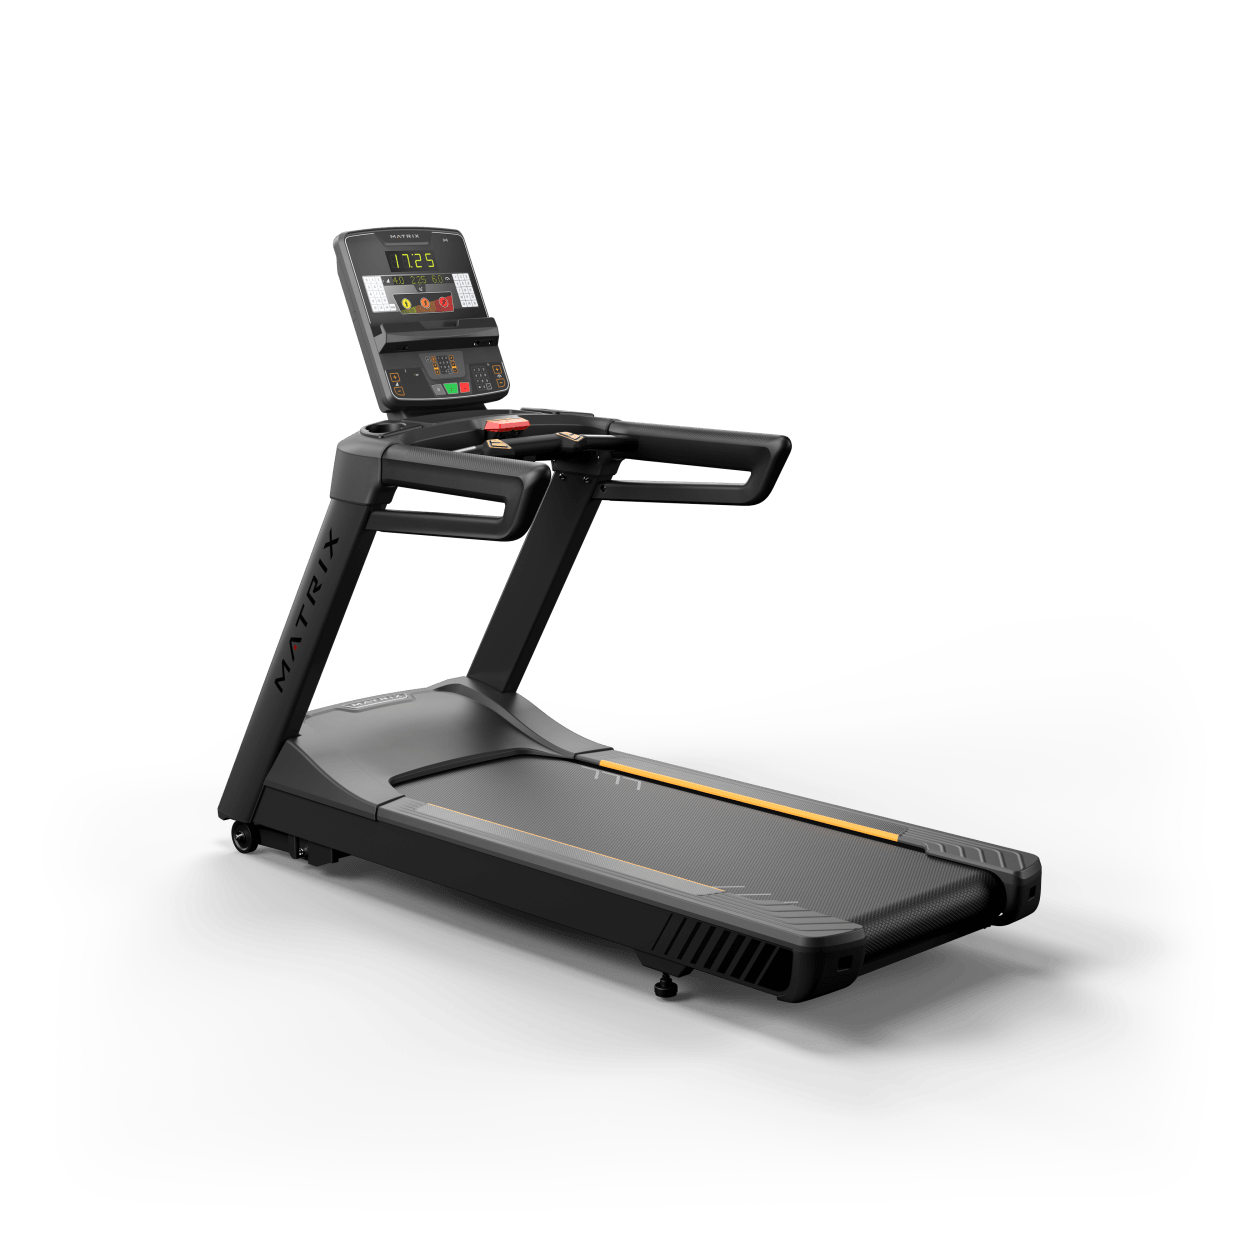 Matrix Fitness Endurance Treadmill with Group Training Console full view | Fitness Experience